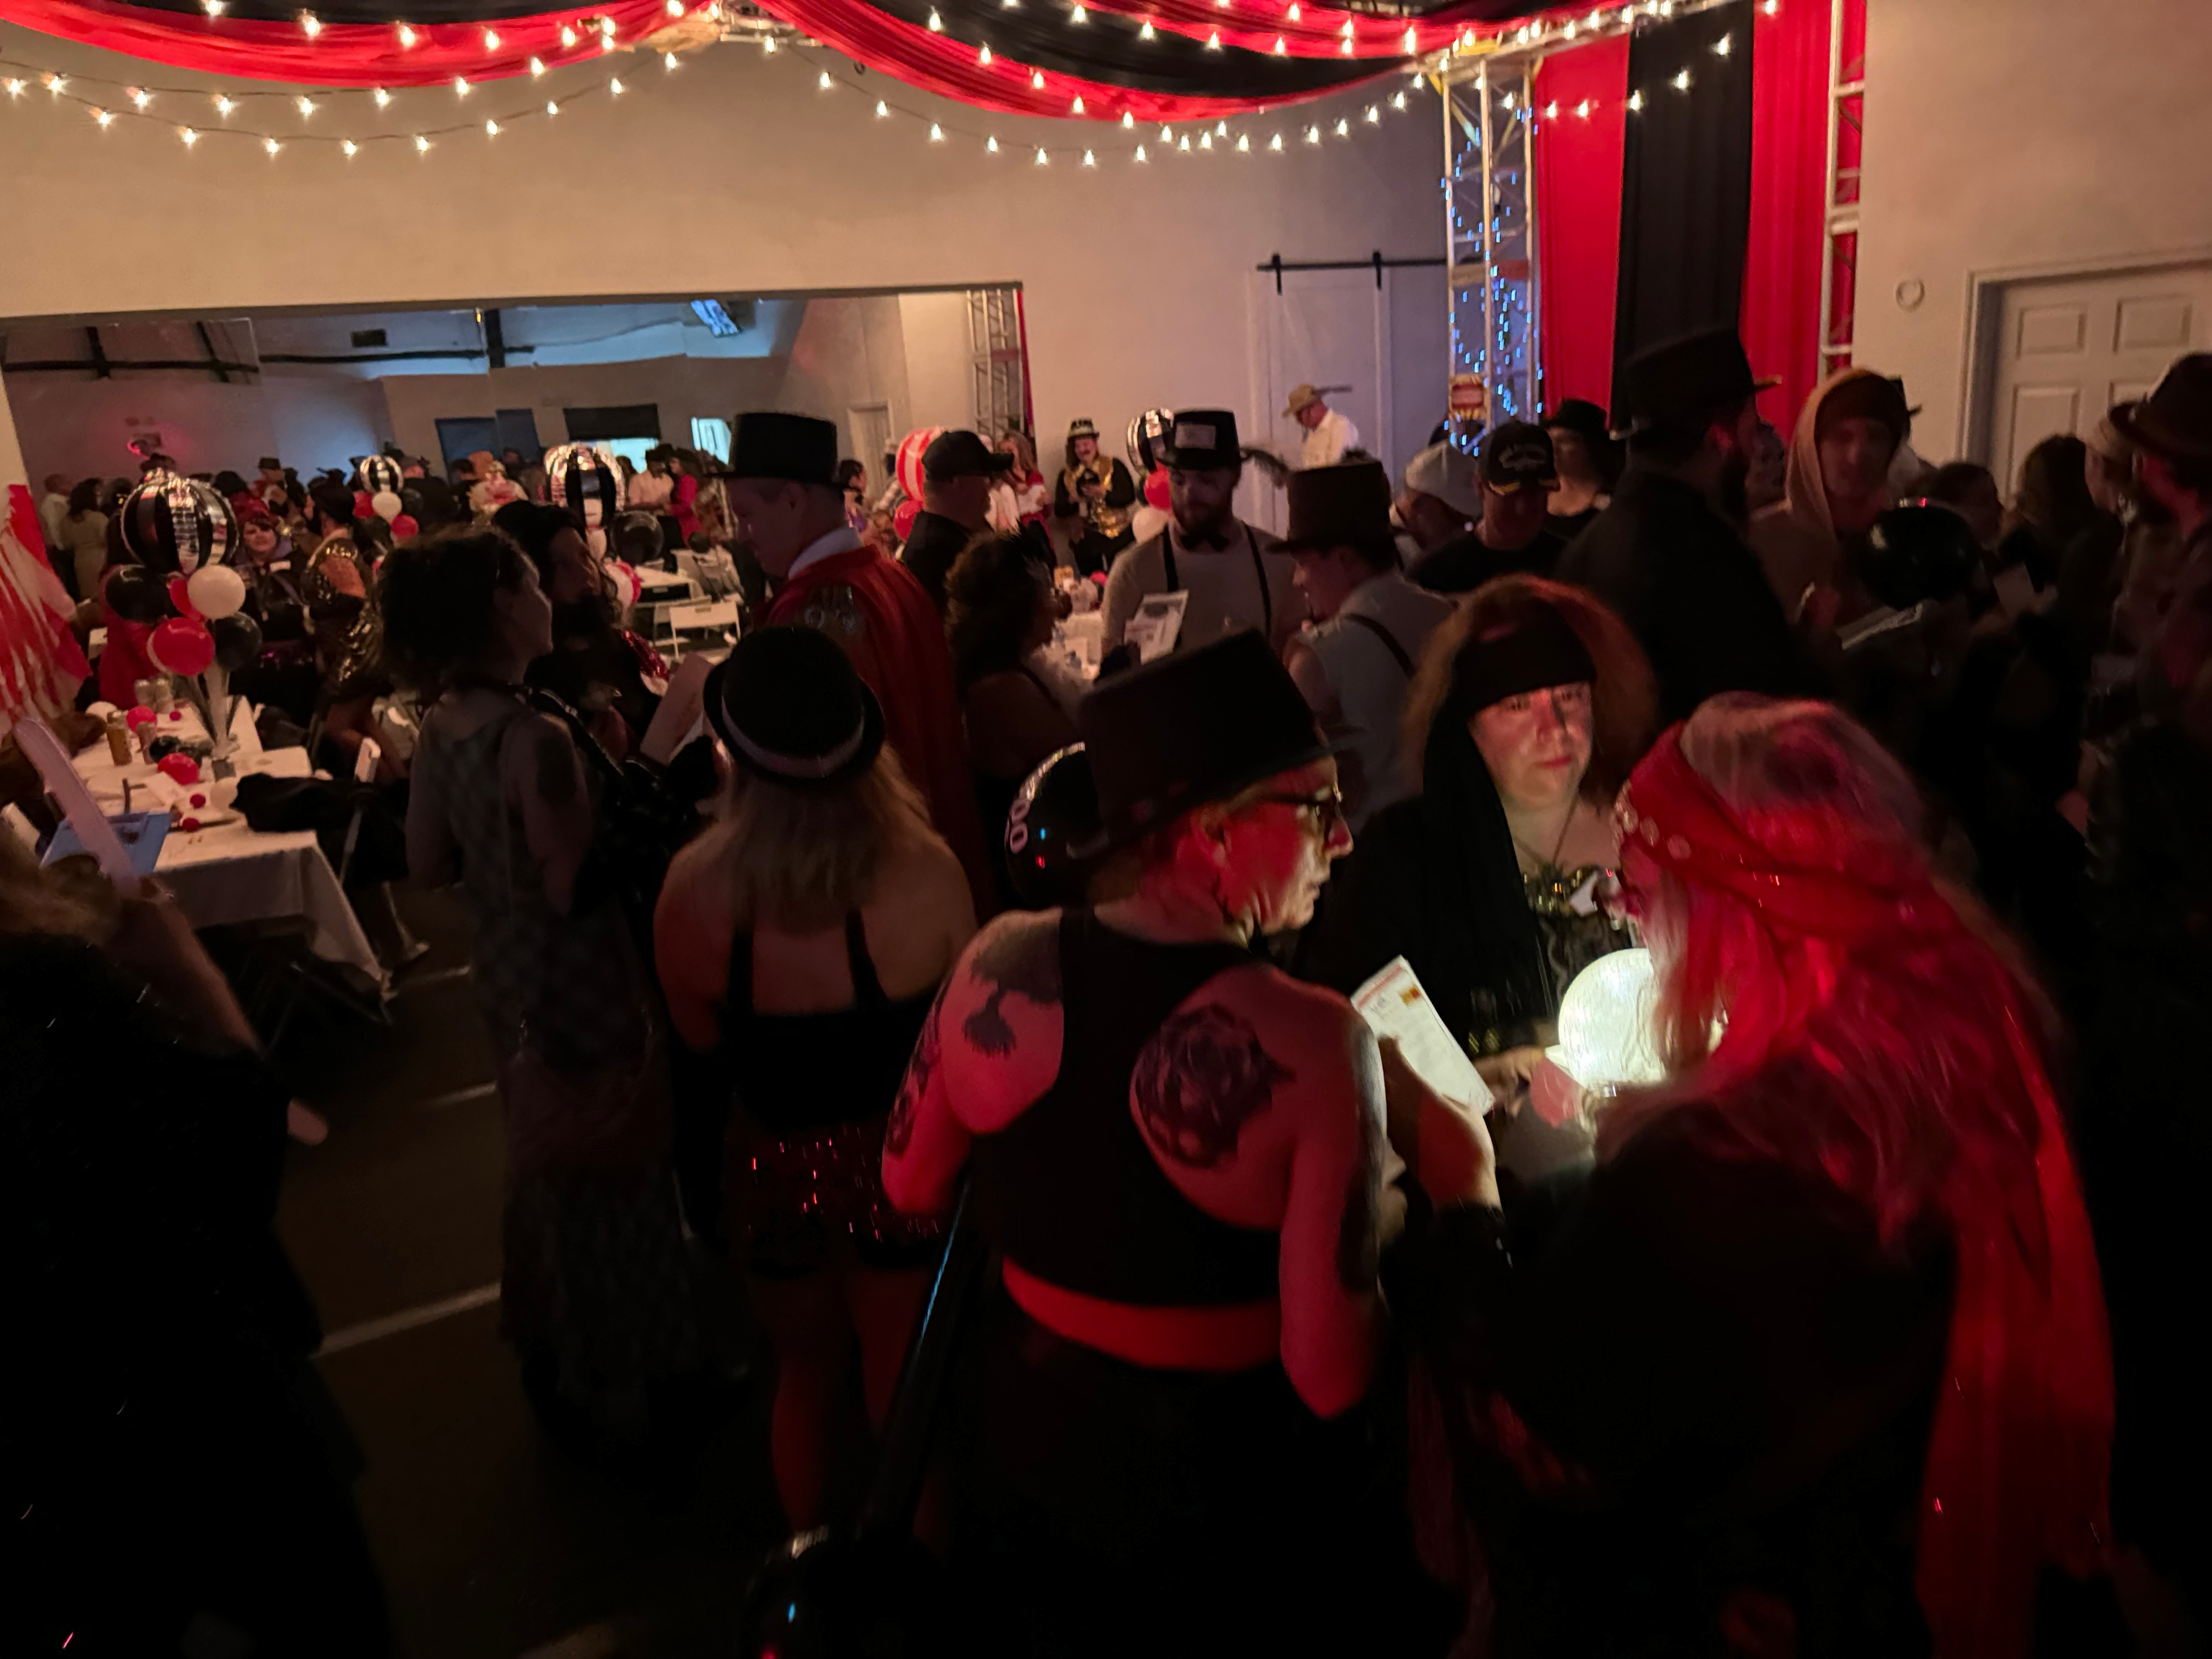 Valentine's Day Weekend - "Totally Rad 80's Prom Gone Bad" Live Action Murder Mystery Dinner